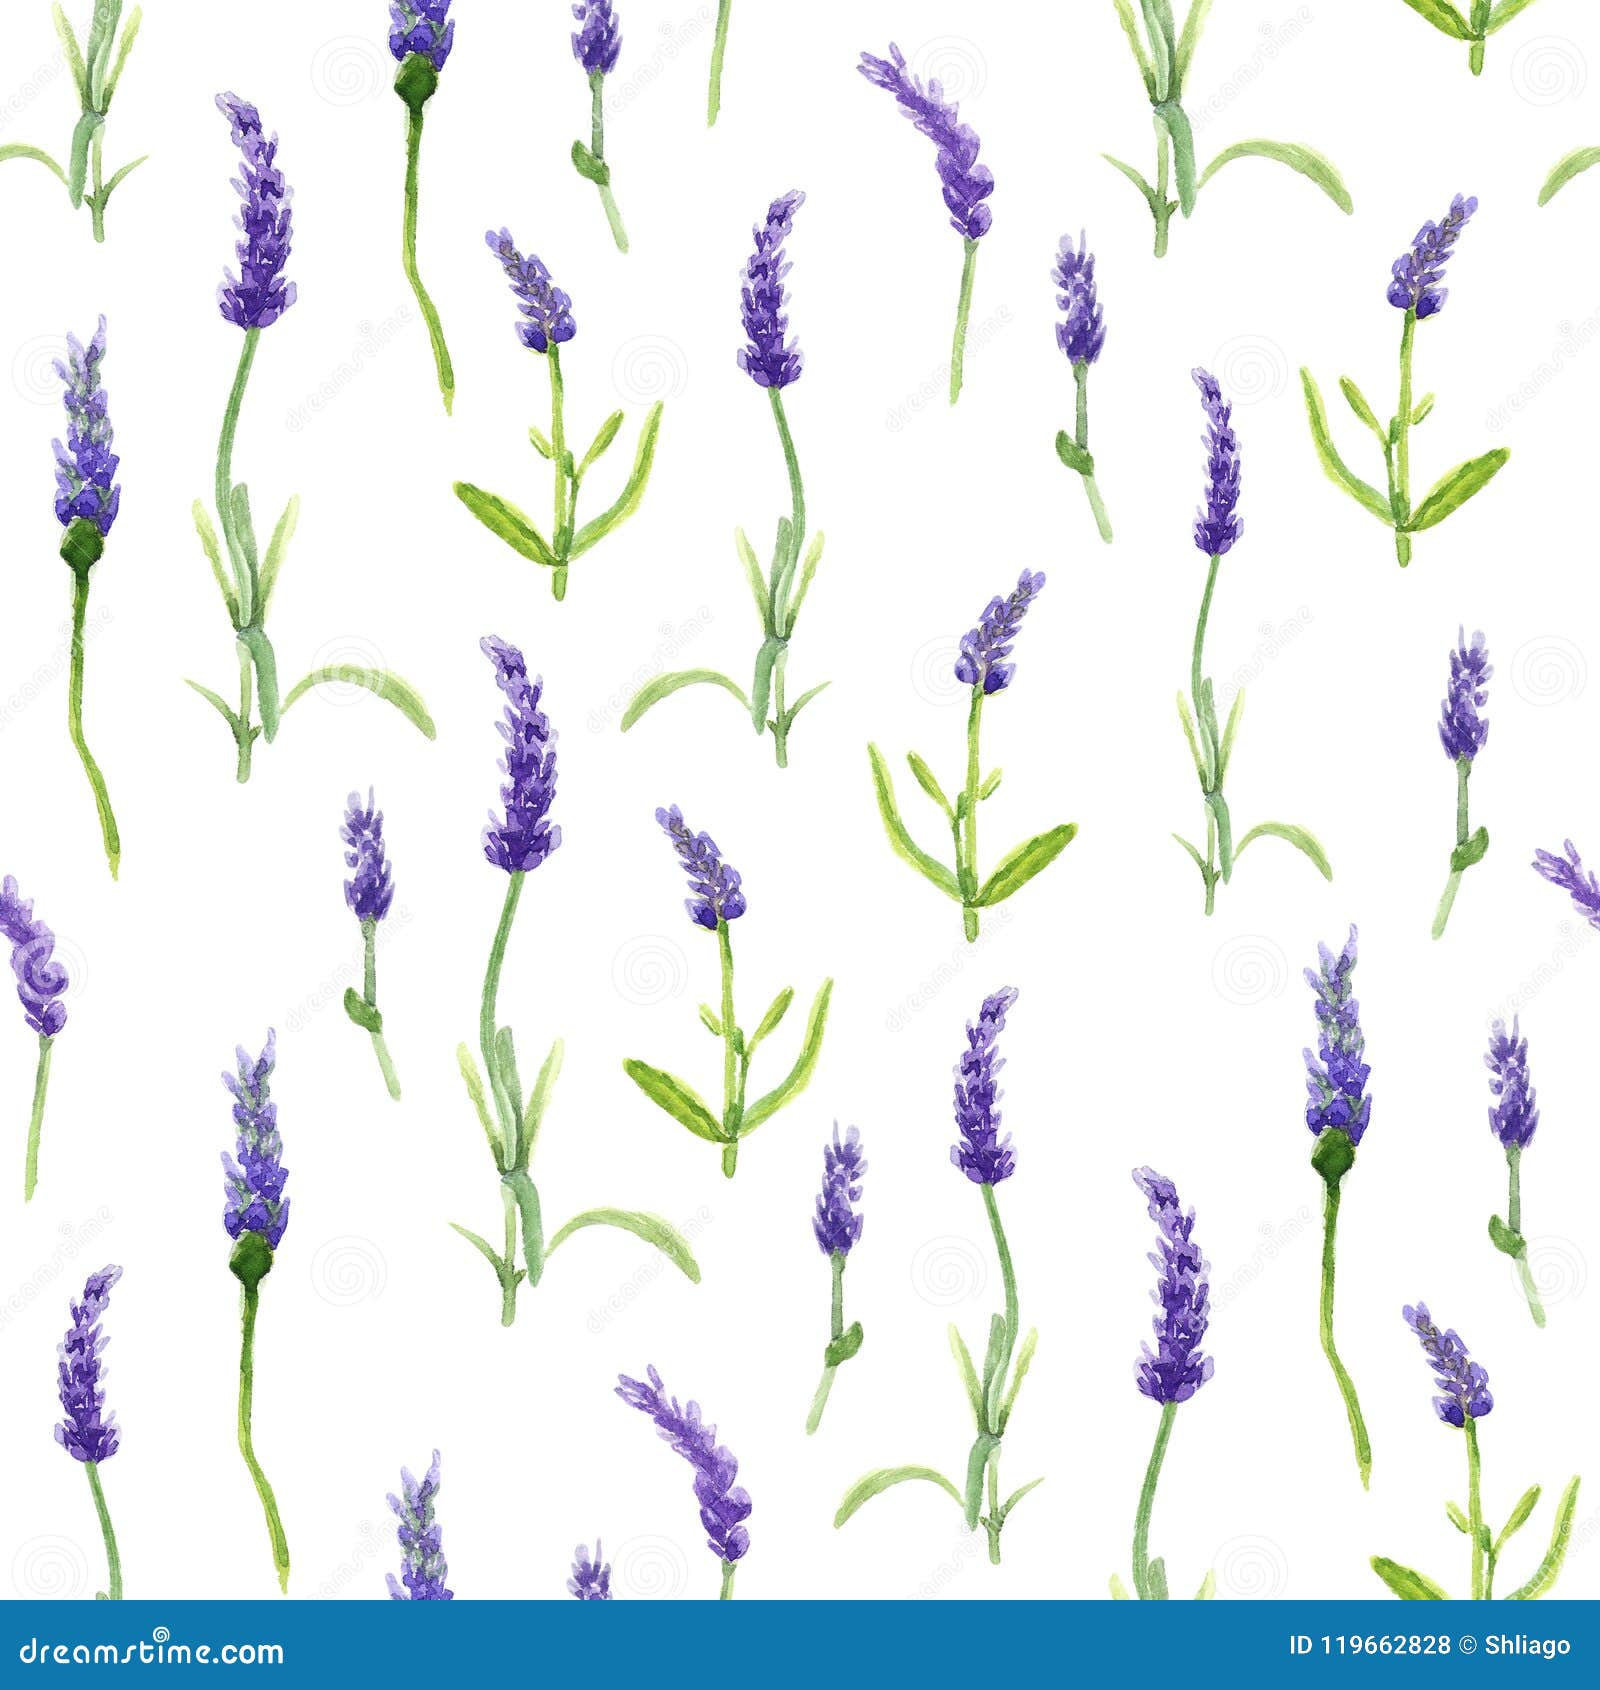 Botany Illustration Lavender Flowers In A Watercolor Style On White